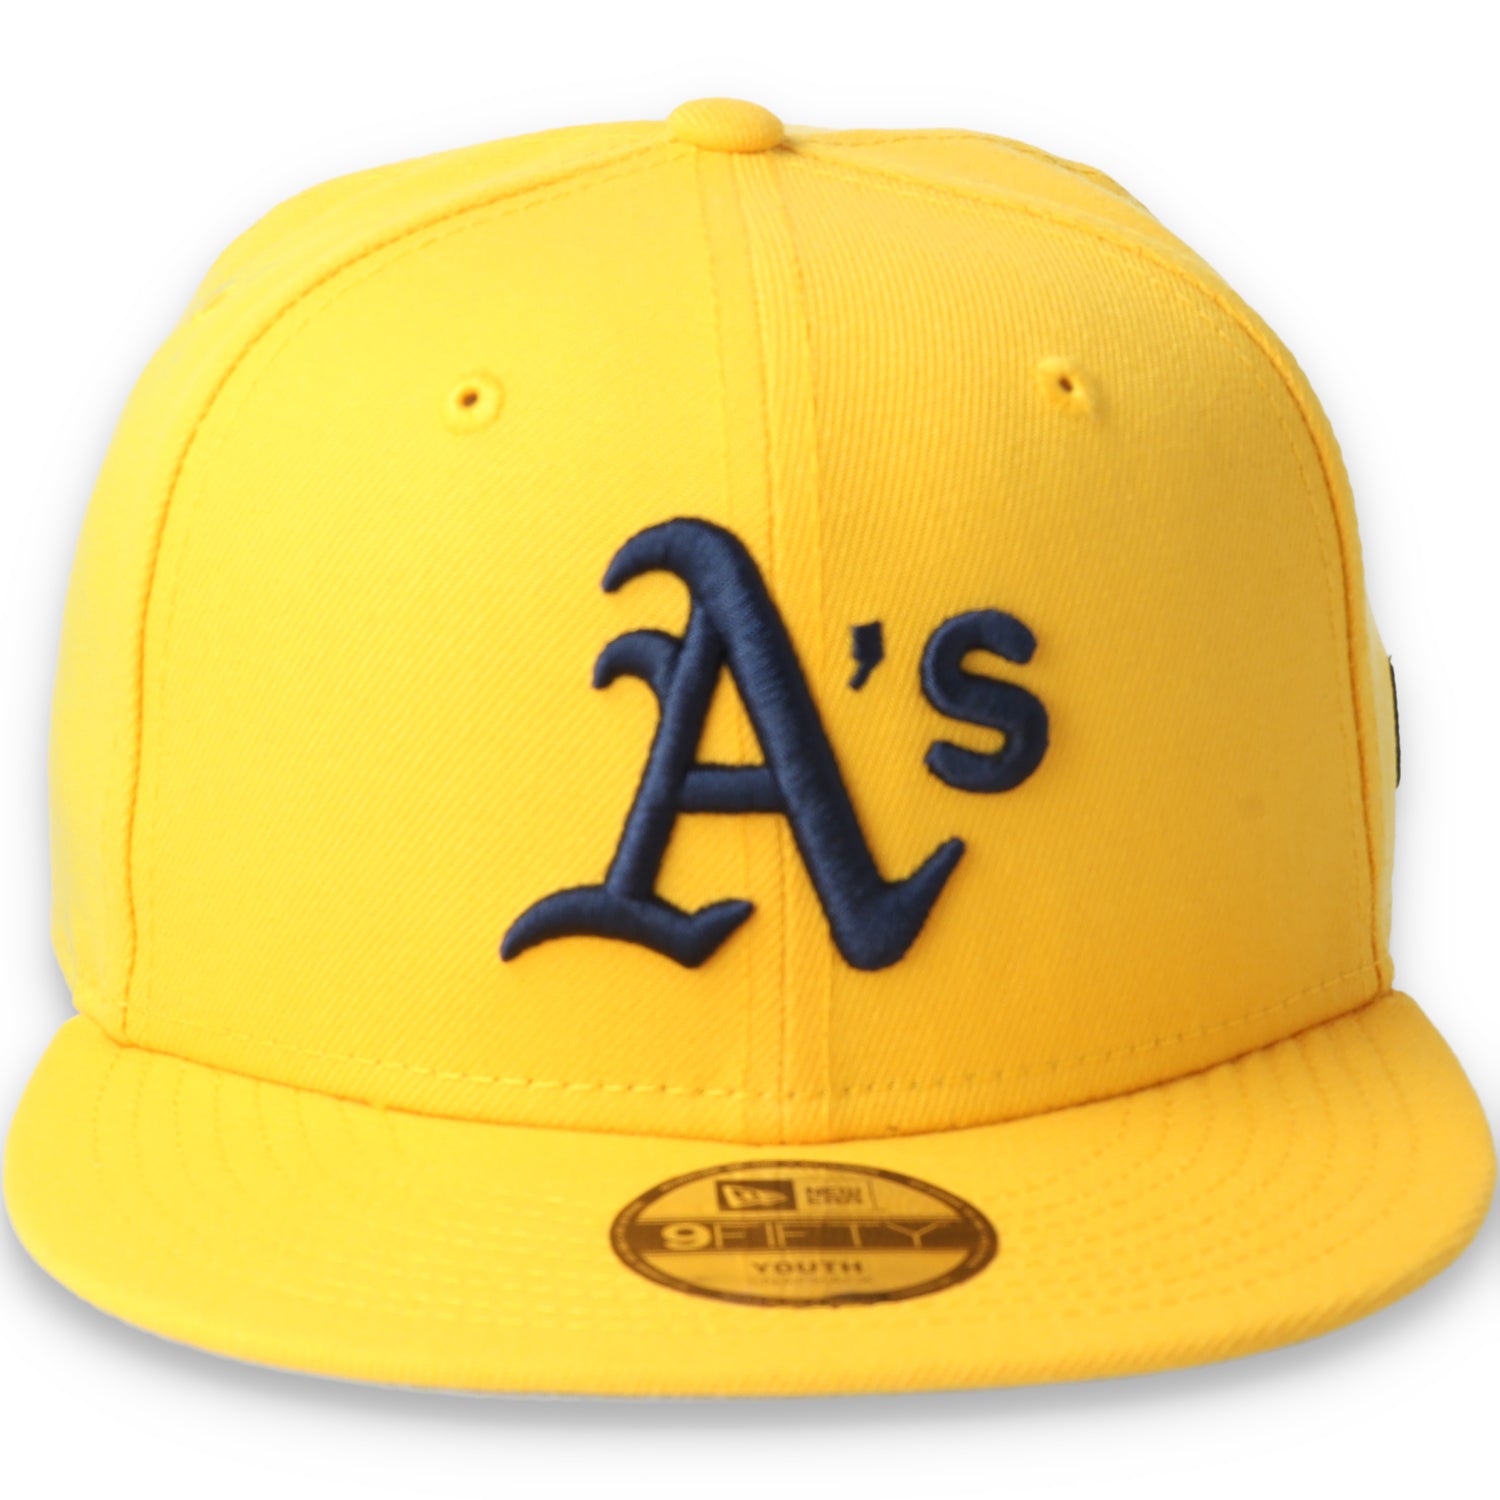 New Era Youth Oakland Athletics Color Pack 9FIFTY Snapback Hat-Yellow